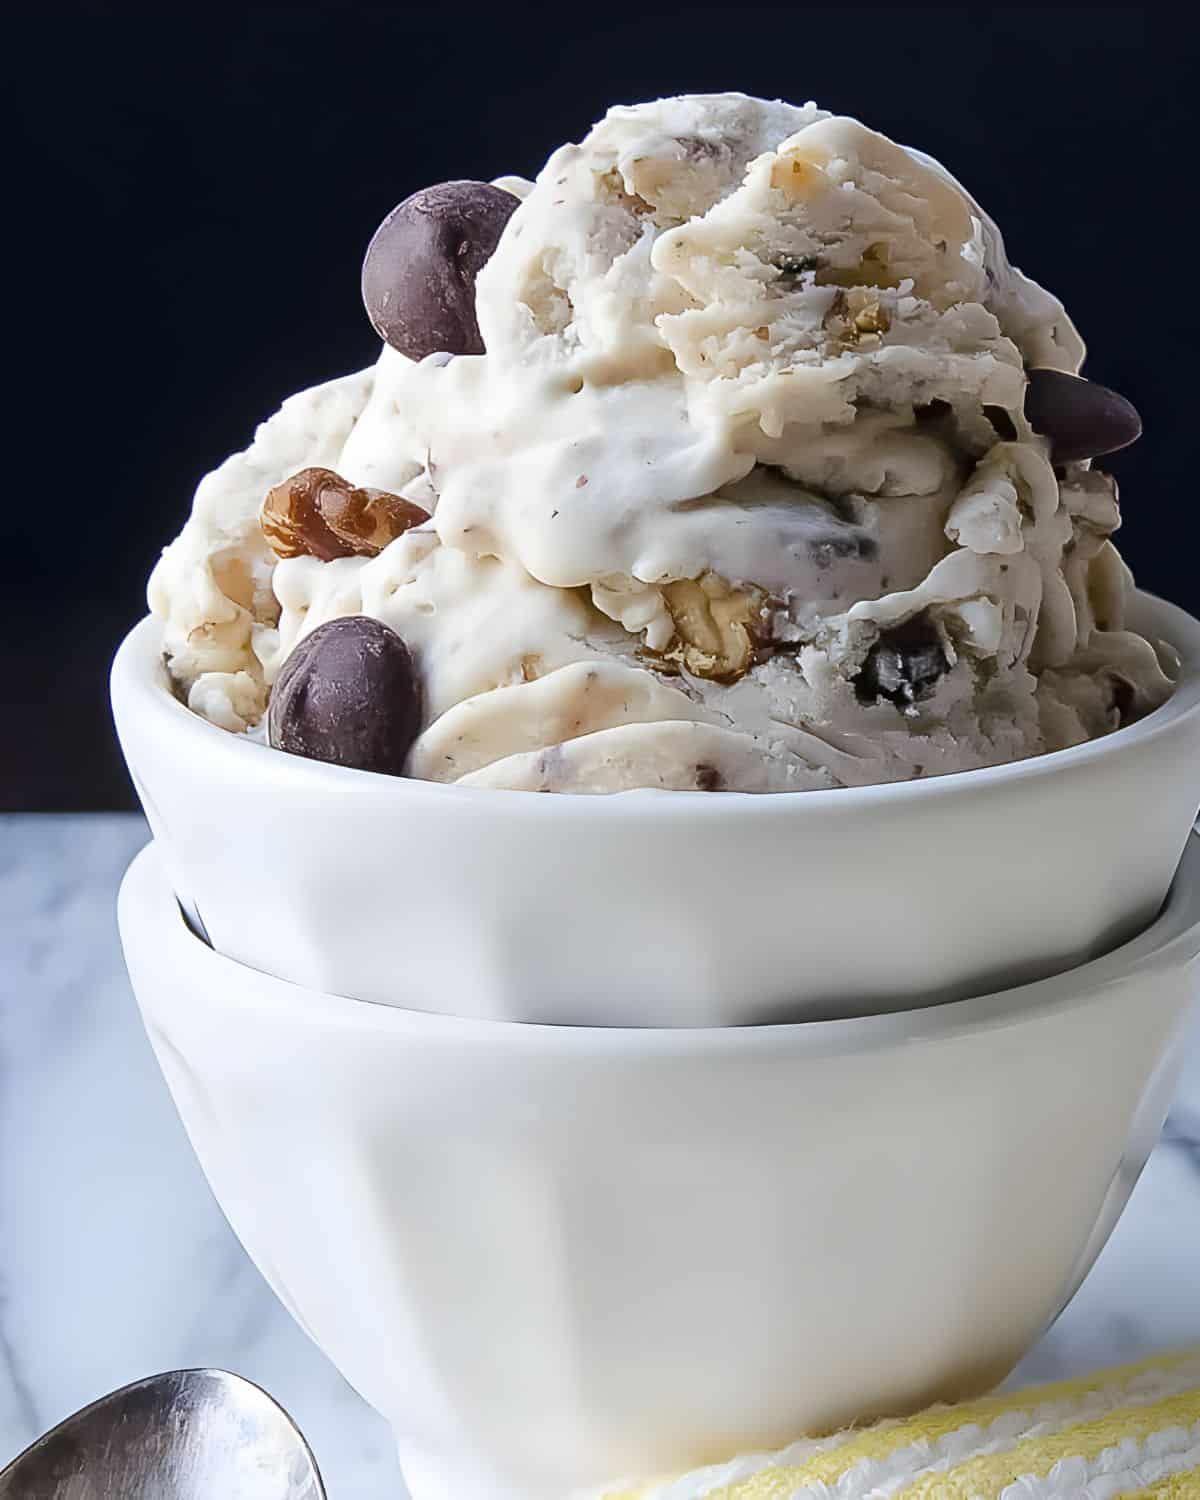 Banana chocolate chip ice cream in a bowl.